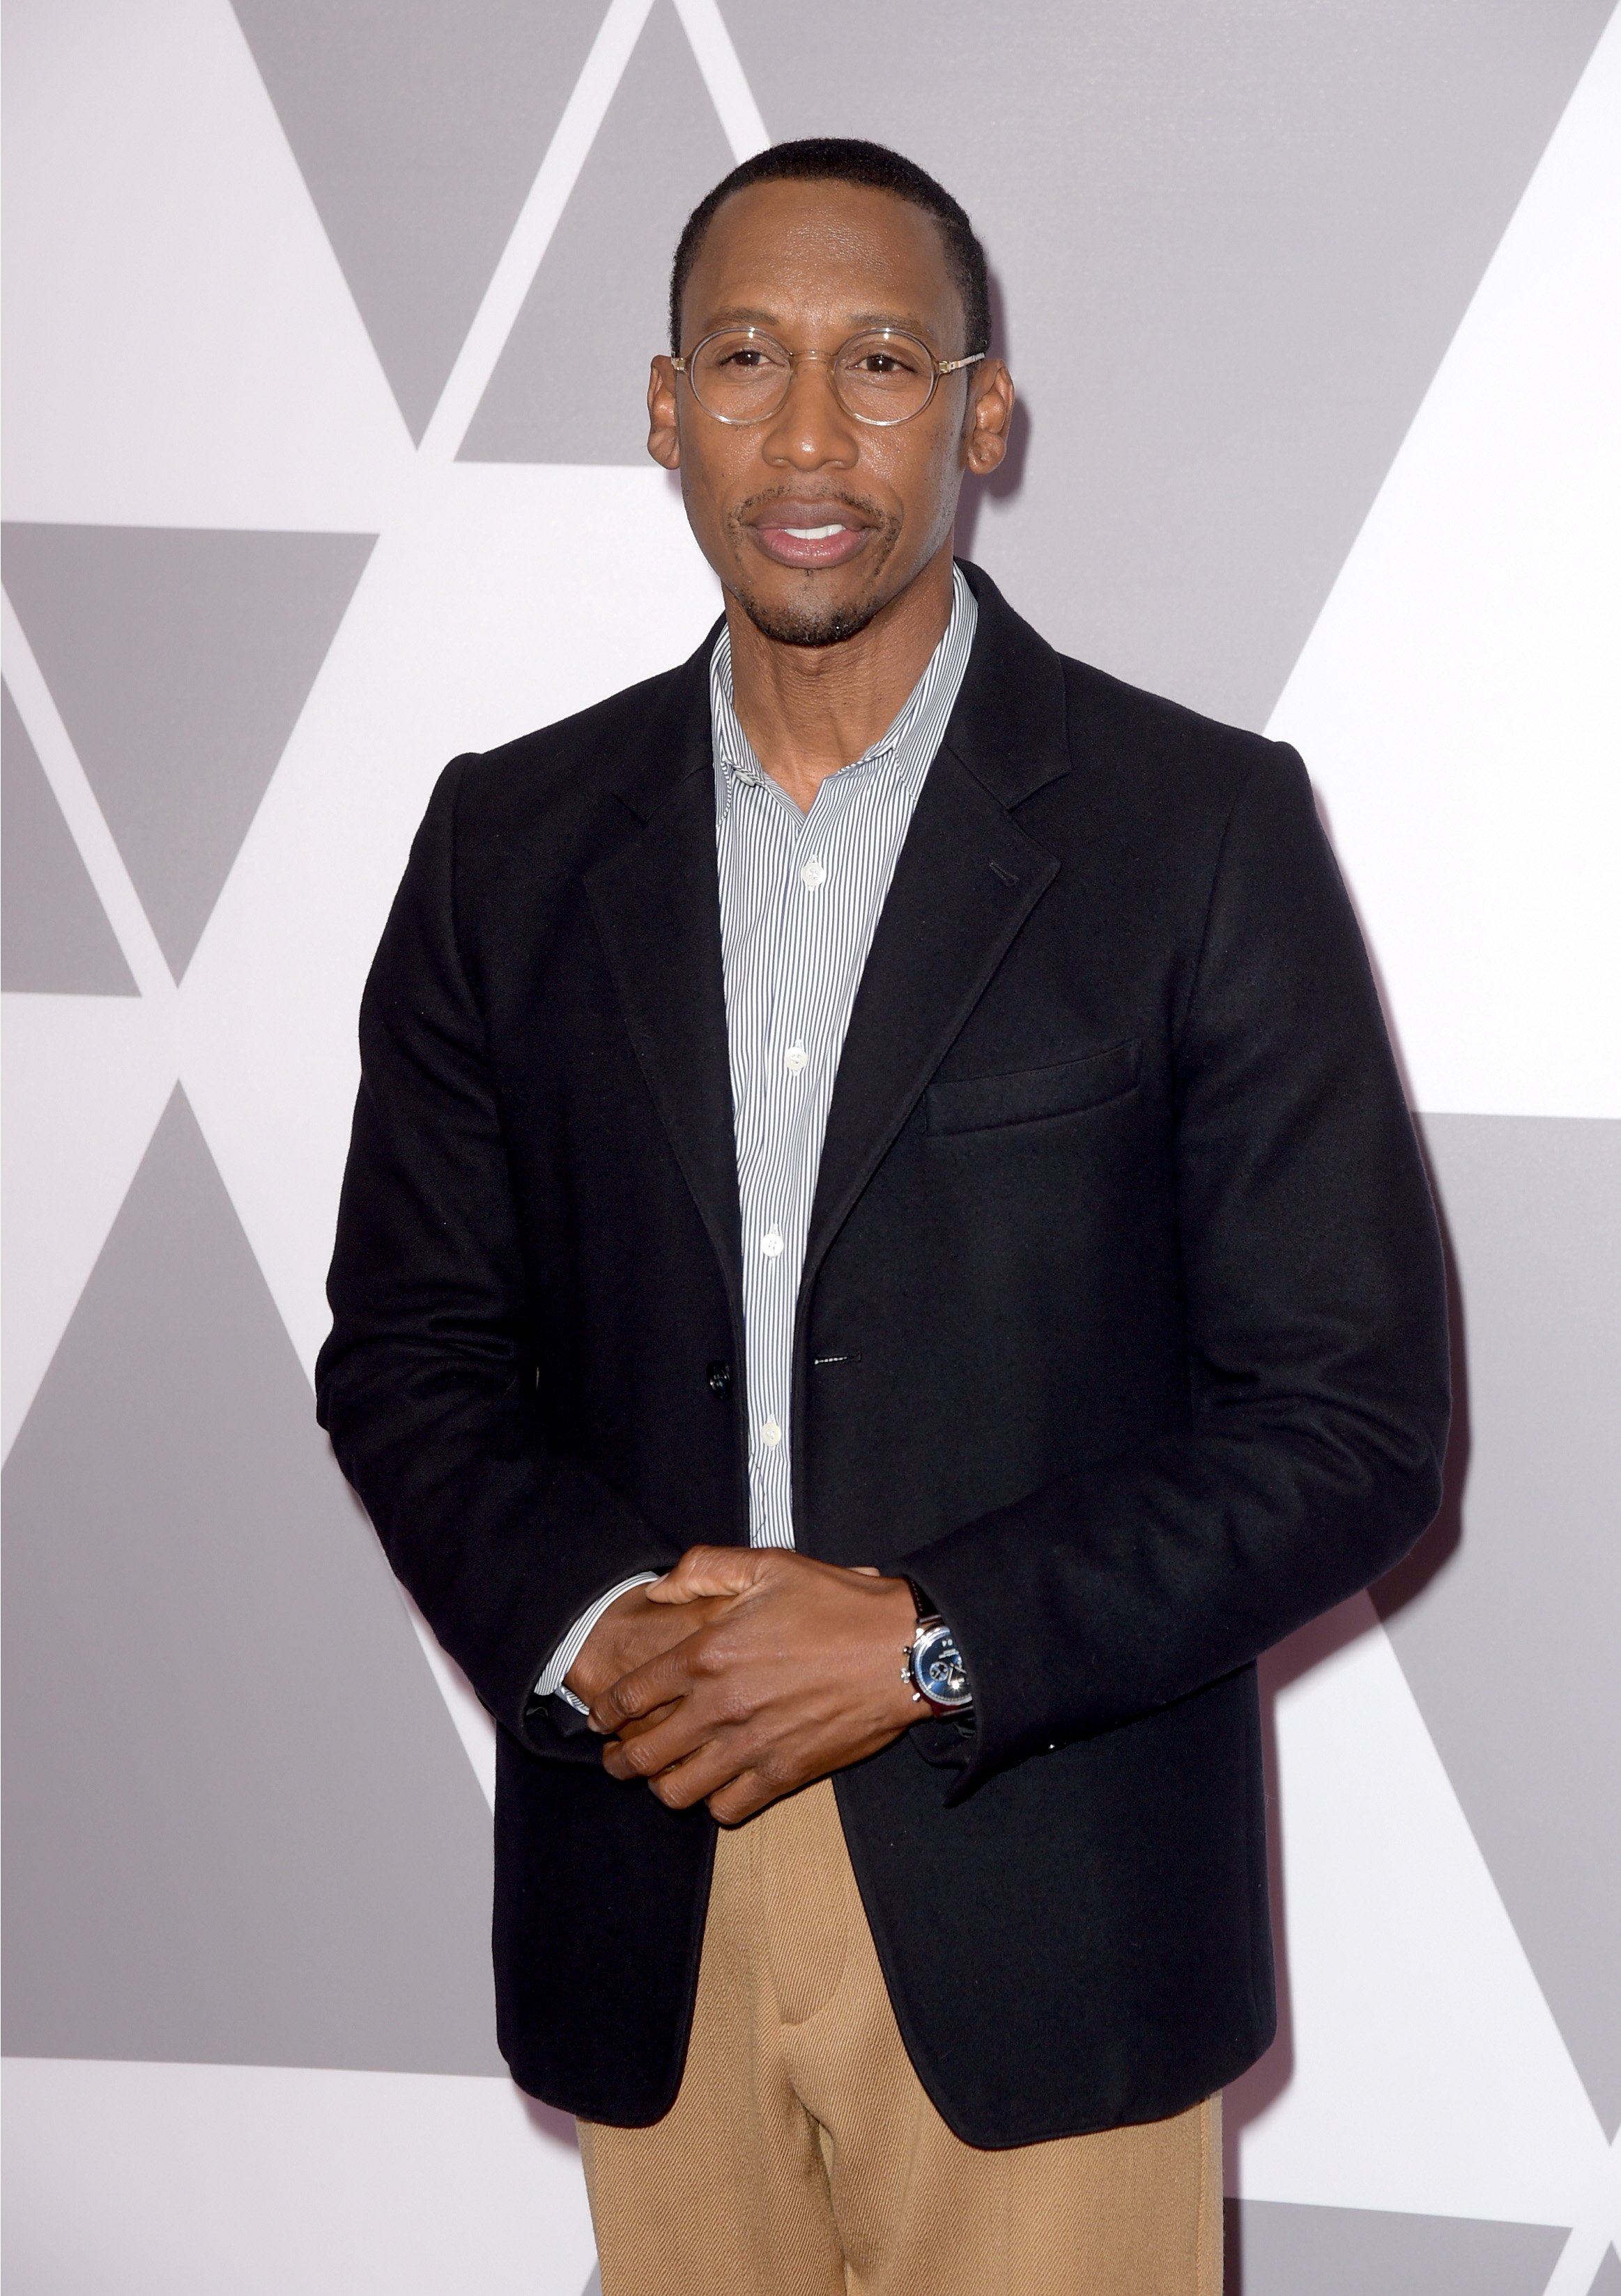 Raphael Saadiq attends the 90th Annual Academy Awards Nominee Luncheon at The Beverly Hilton Hotel February 5, 2018 in California. | Photo: Getty Images